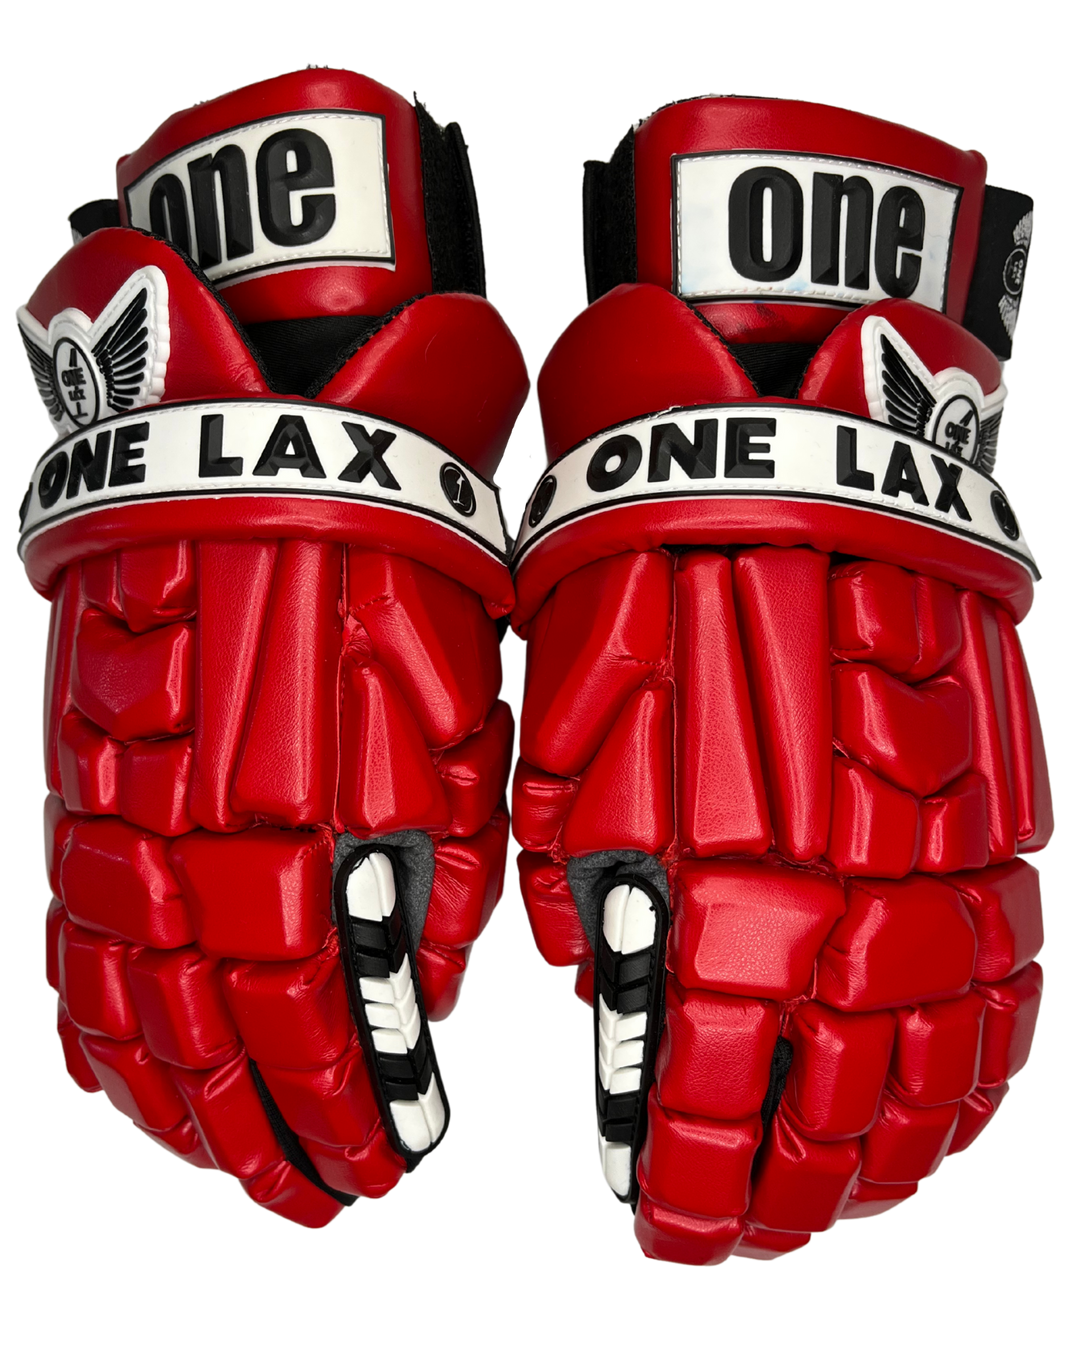 1 Gloves in Red | 4 Sizes Available | HYBRID Box & Field Lacrosse Gloves - One Lax